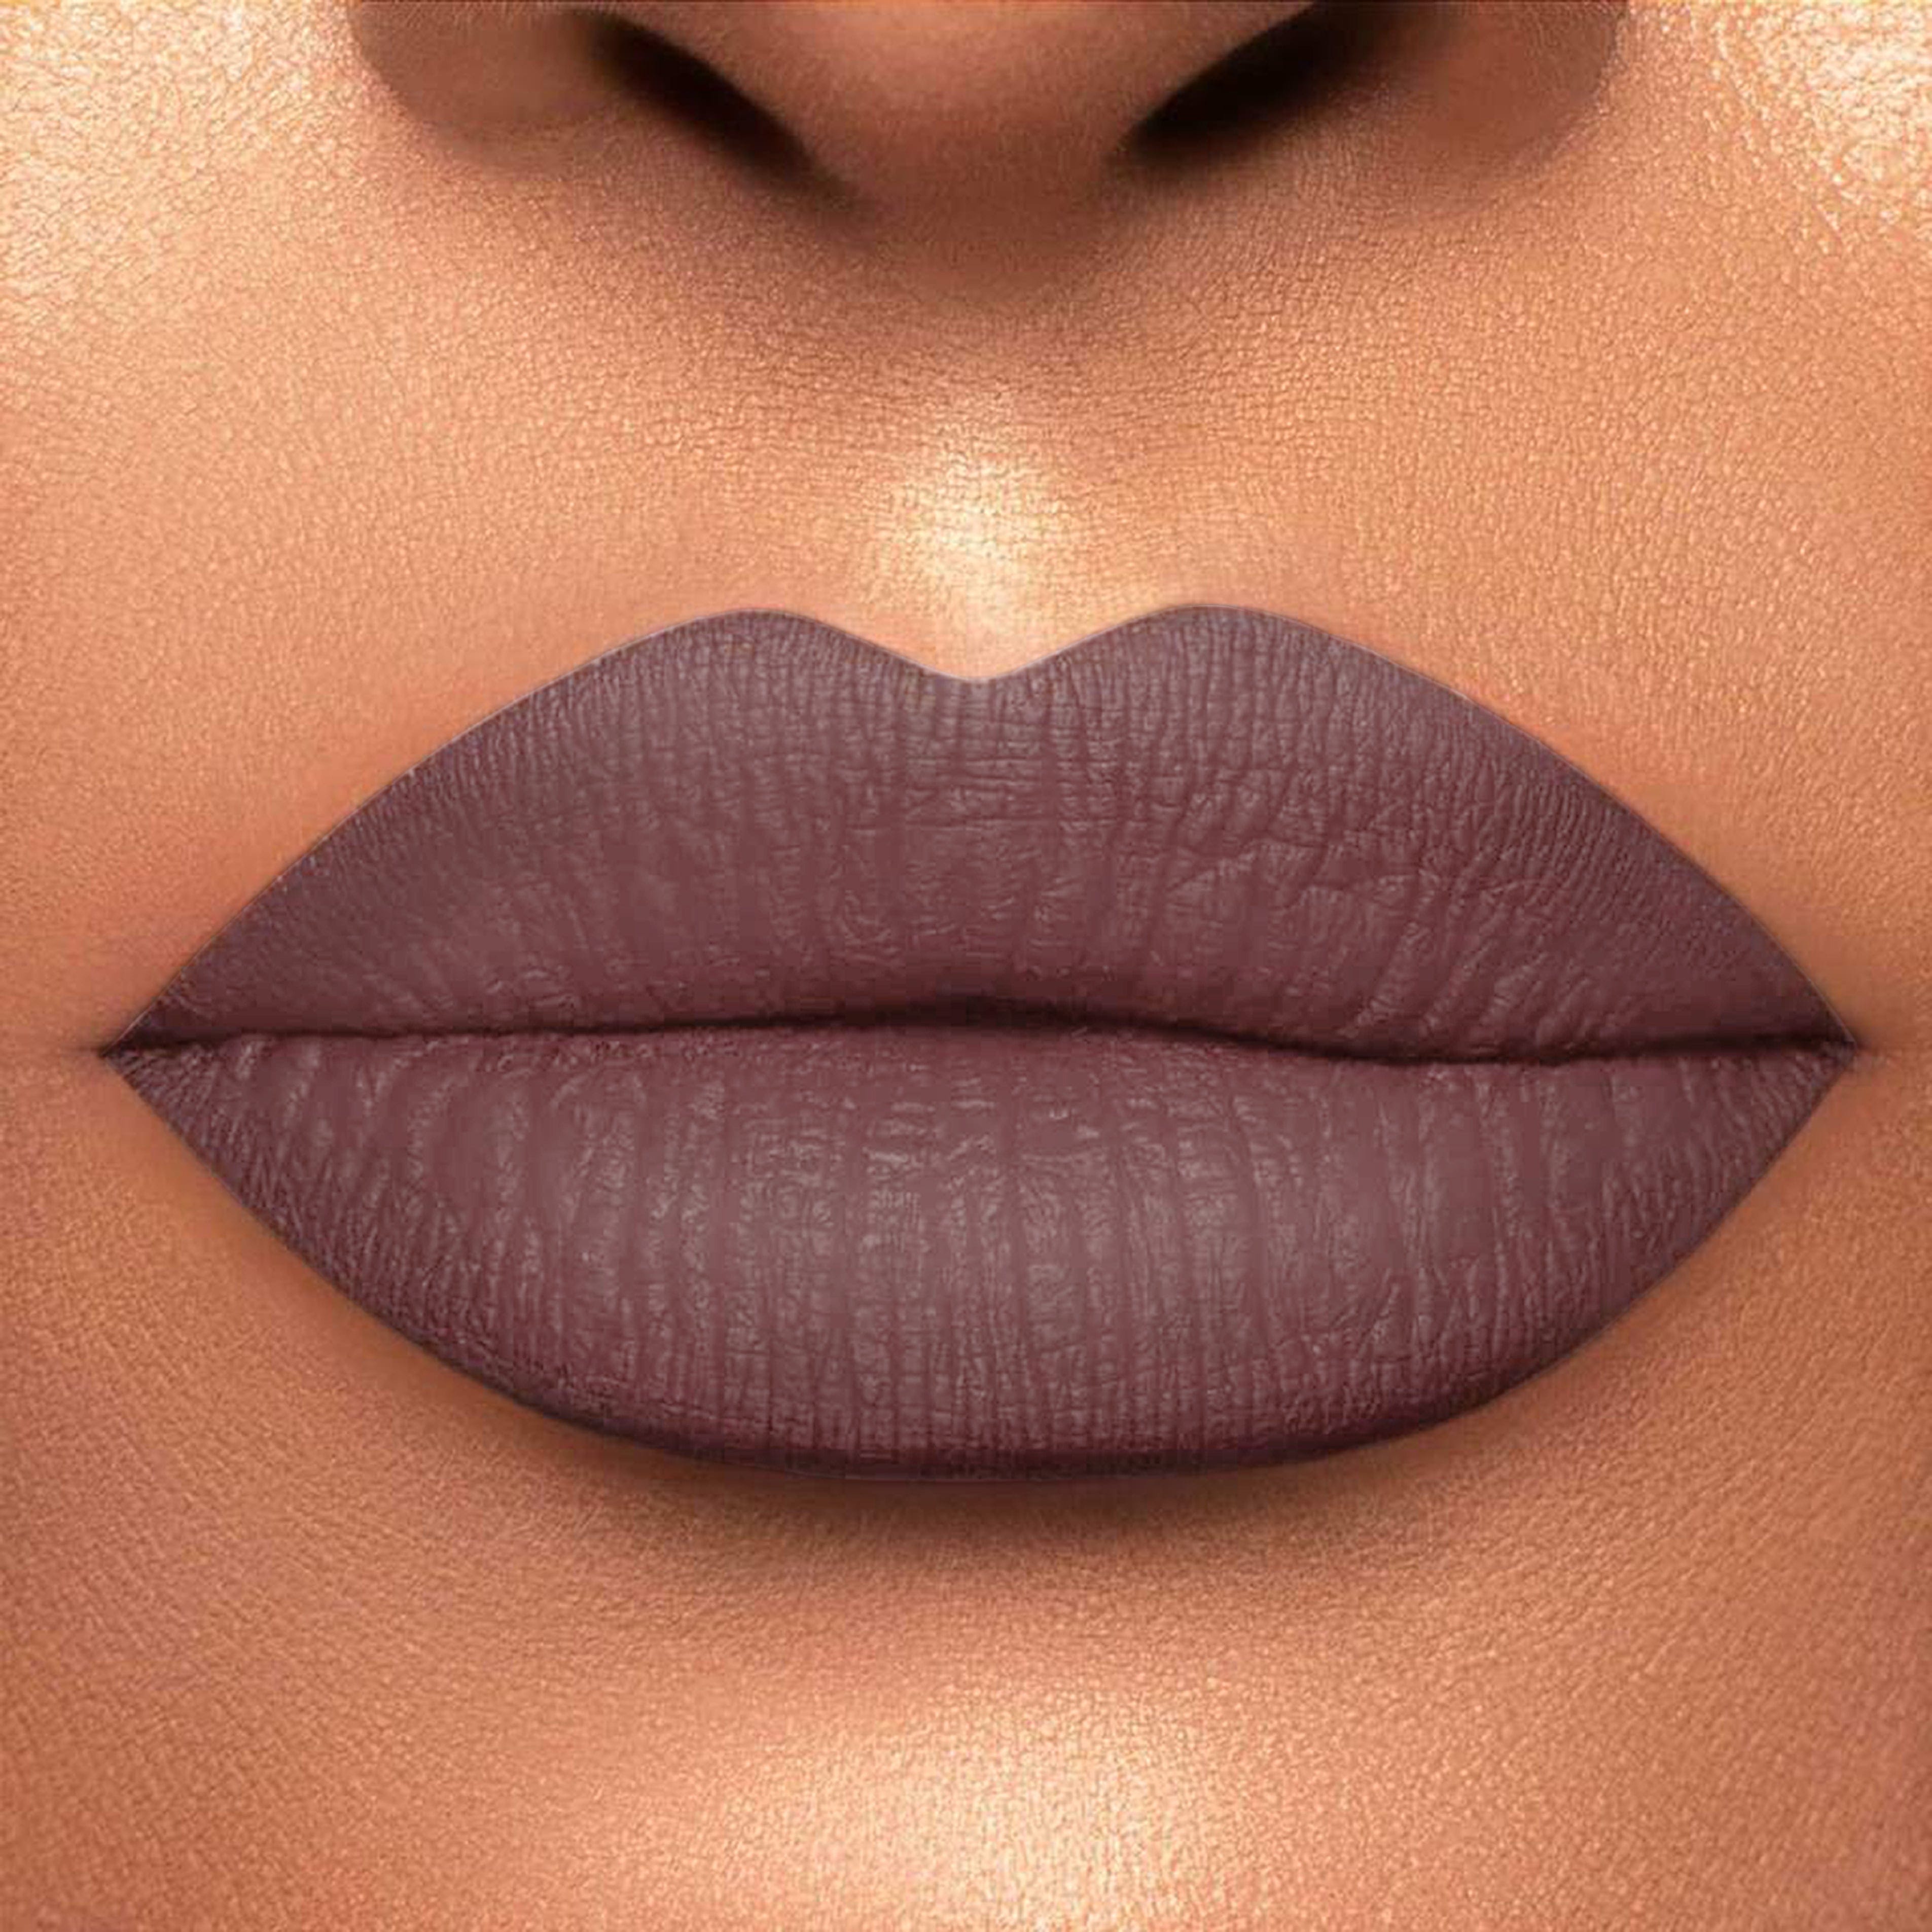 Vigilant is a deep blue violet matte liquid lipstick with an intense finish. It has a strong and long-lasting formula for a flawless look throughout the day. Its rev